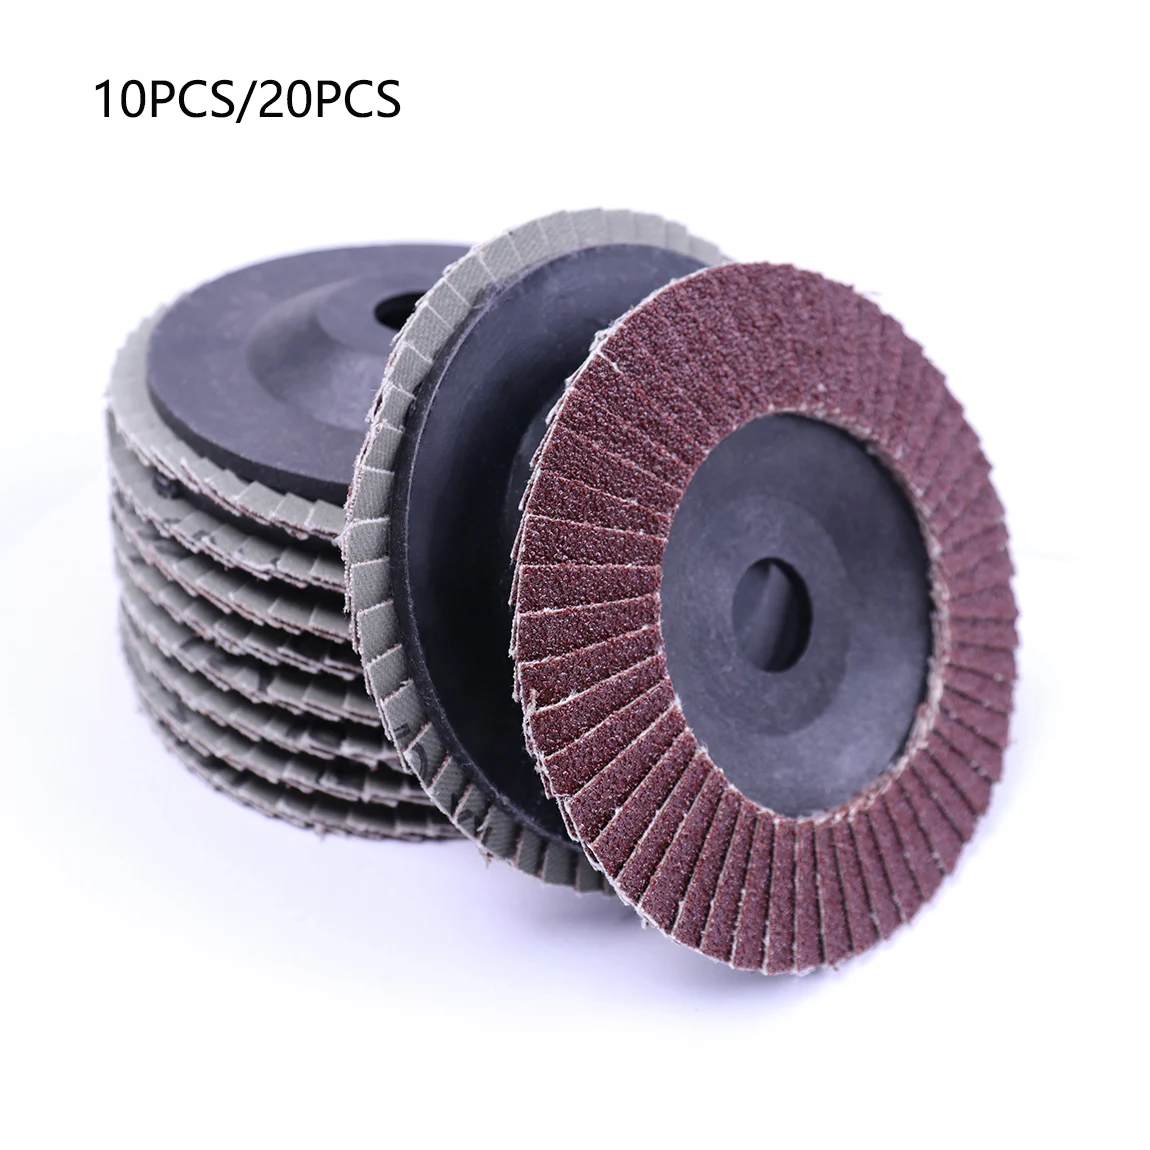 CHEERBRIGHT 10/20pcs Sanding Discs 80 Grit Grinding Wheel Blade for 100mm Angle Grinder Abrasive Tool Sanding Disc 10pcs 100mm flap discs 60 80 120 grit grinding wheels blades for angle grinder sanding disk grinding wheel abrasive tools